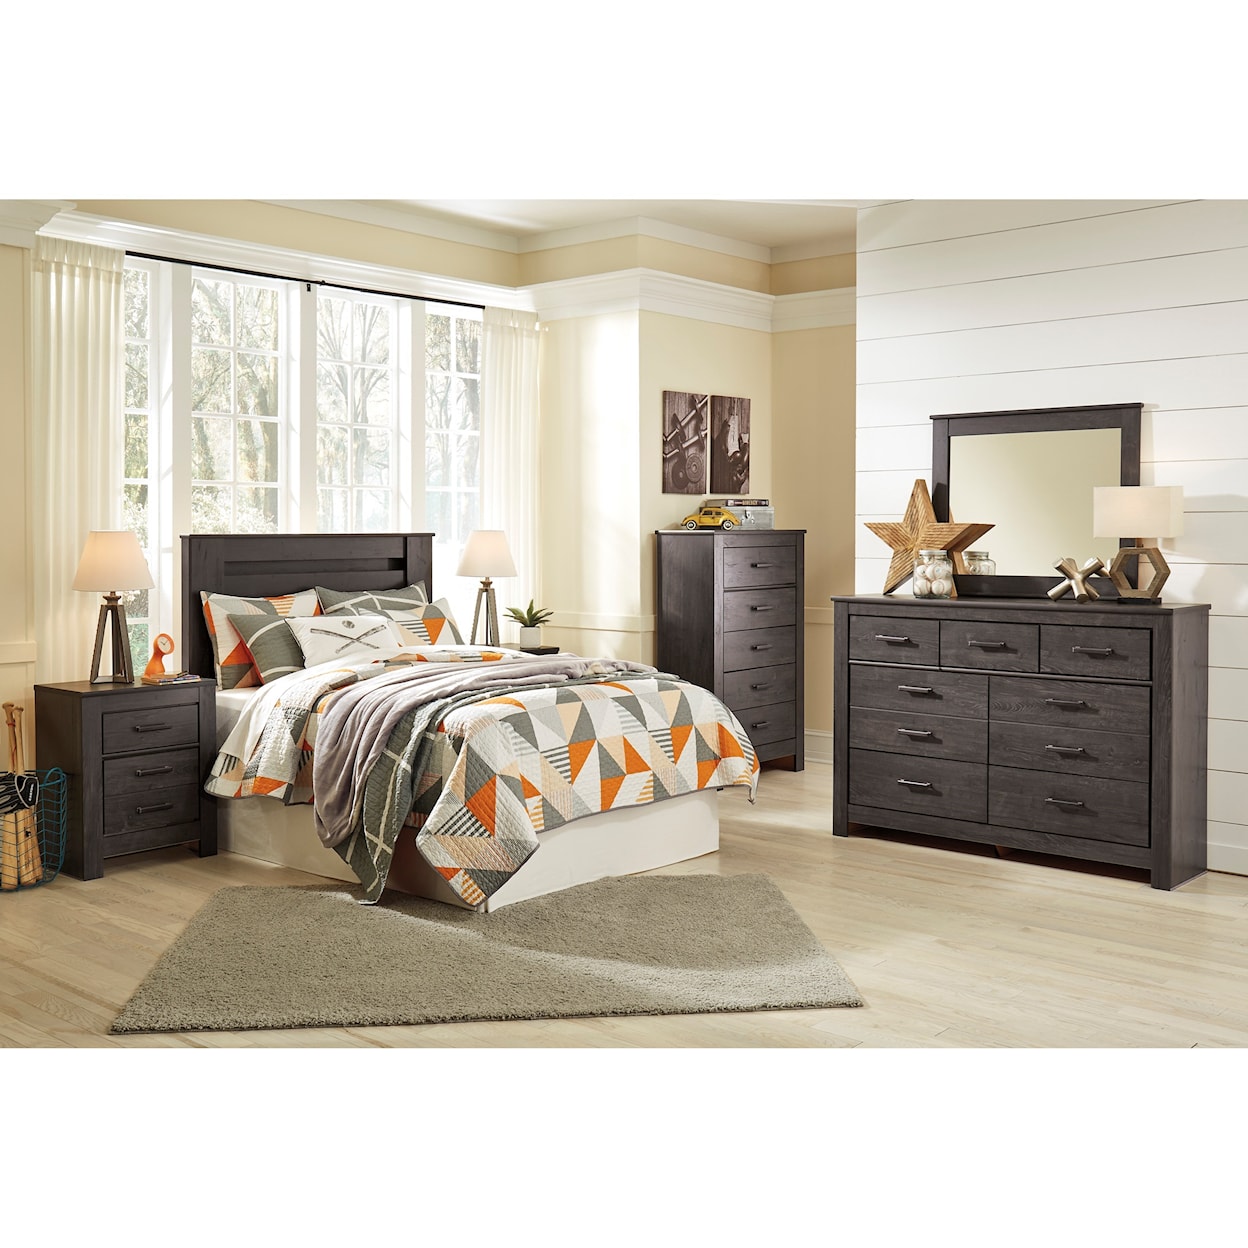 Signature Design by Ashley Furniture Brinxton Full Bedroom Group